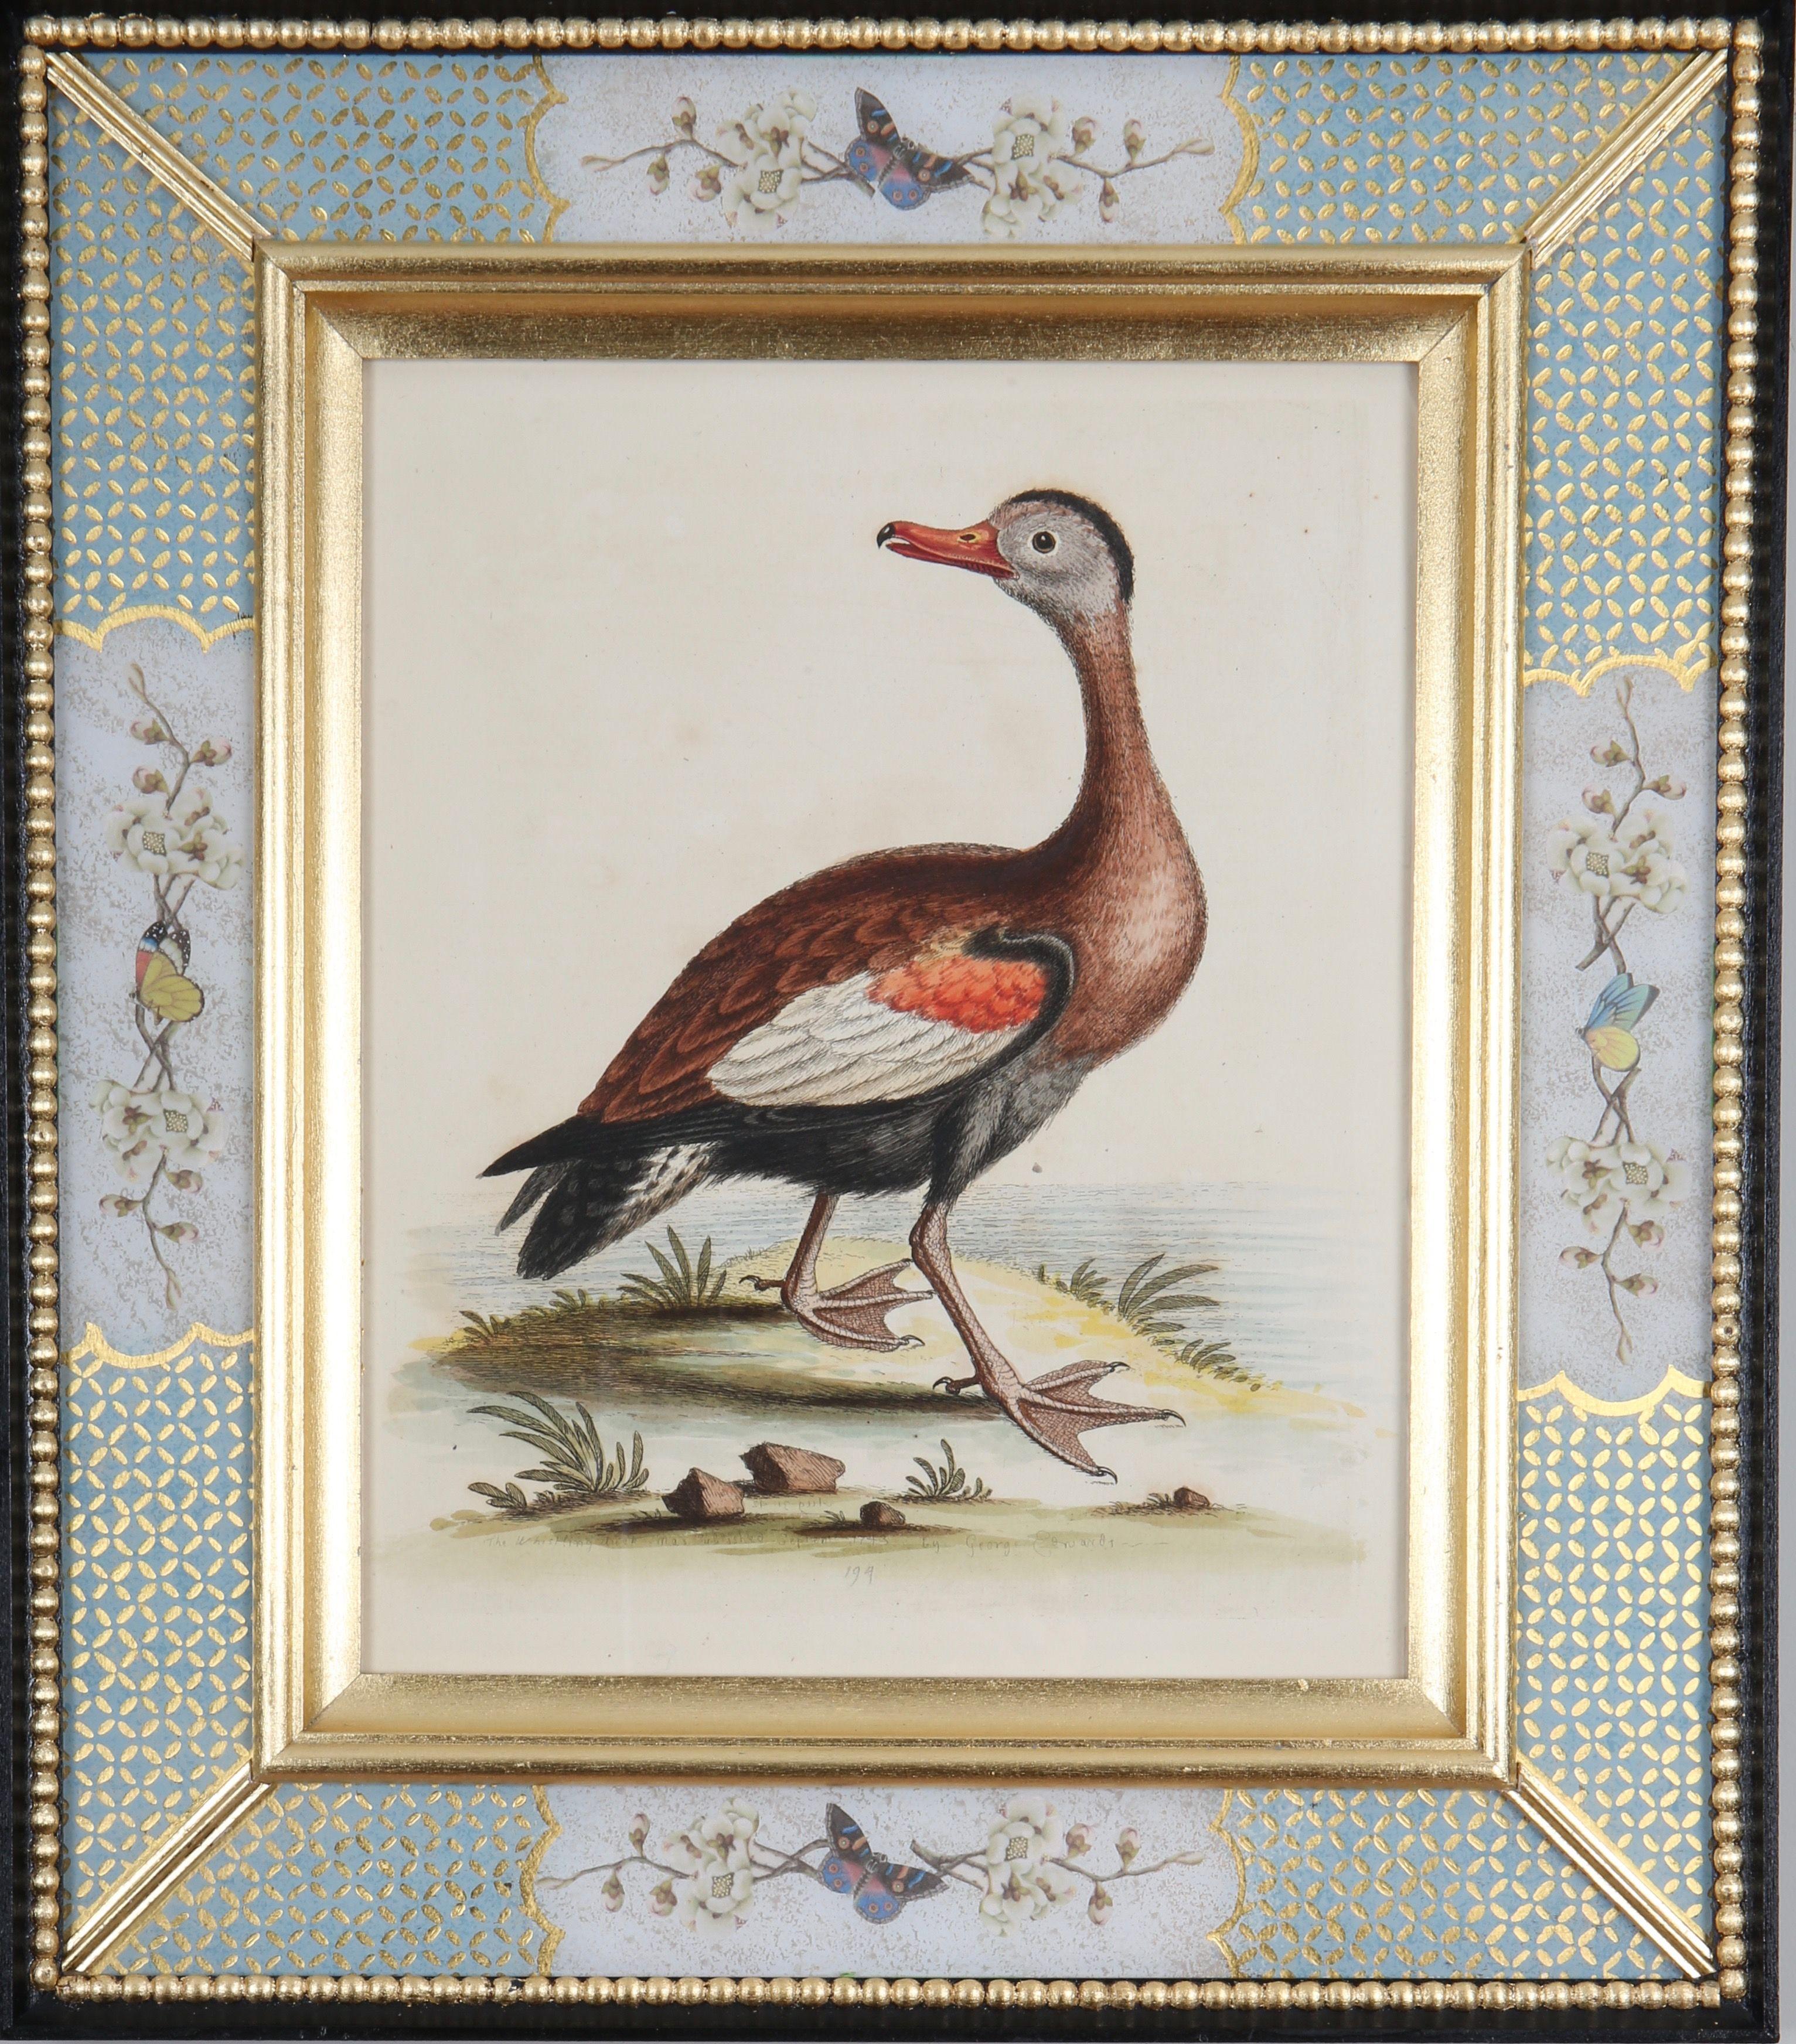 Set of Twelve 18th Century Engravings of Ducks And Wading Birds - Art by George Edwards